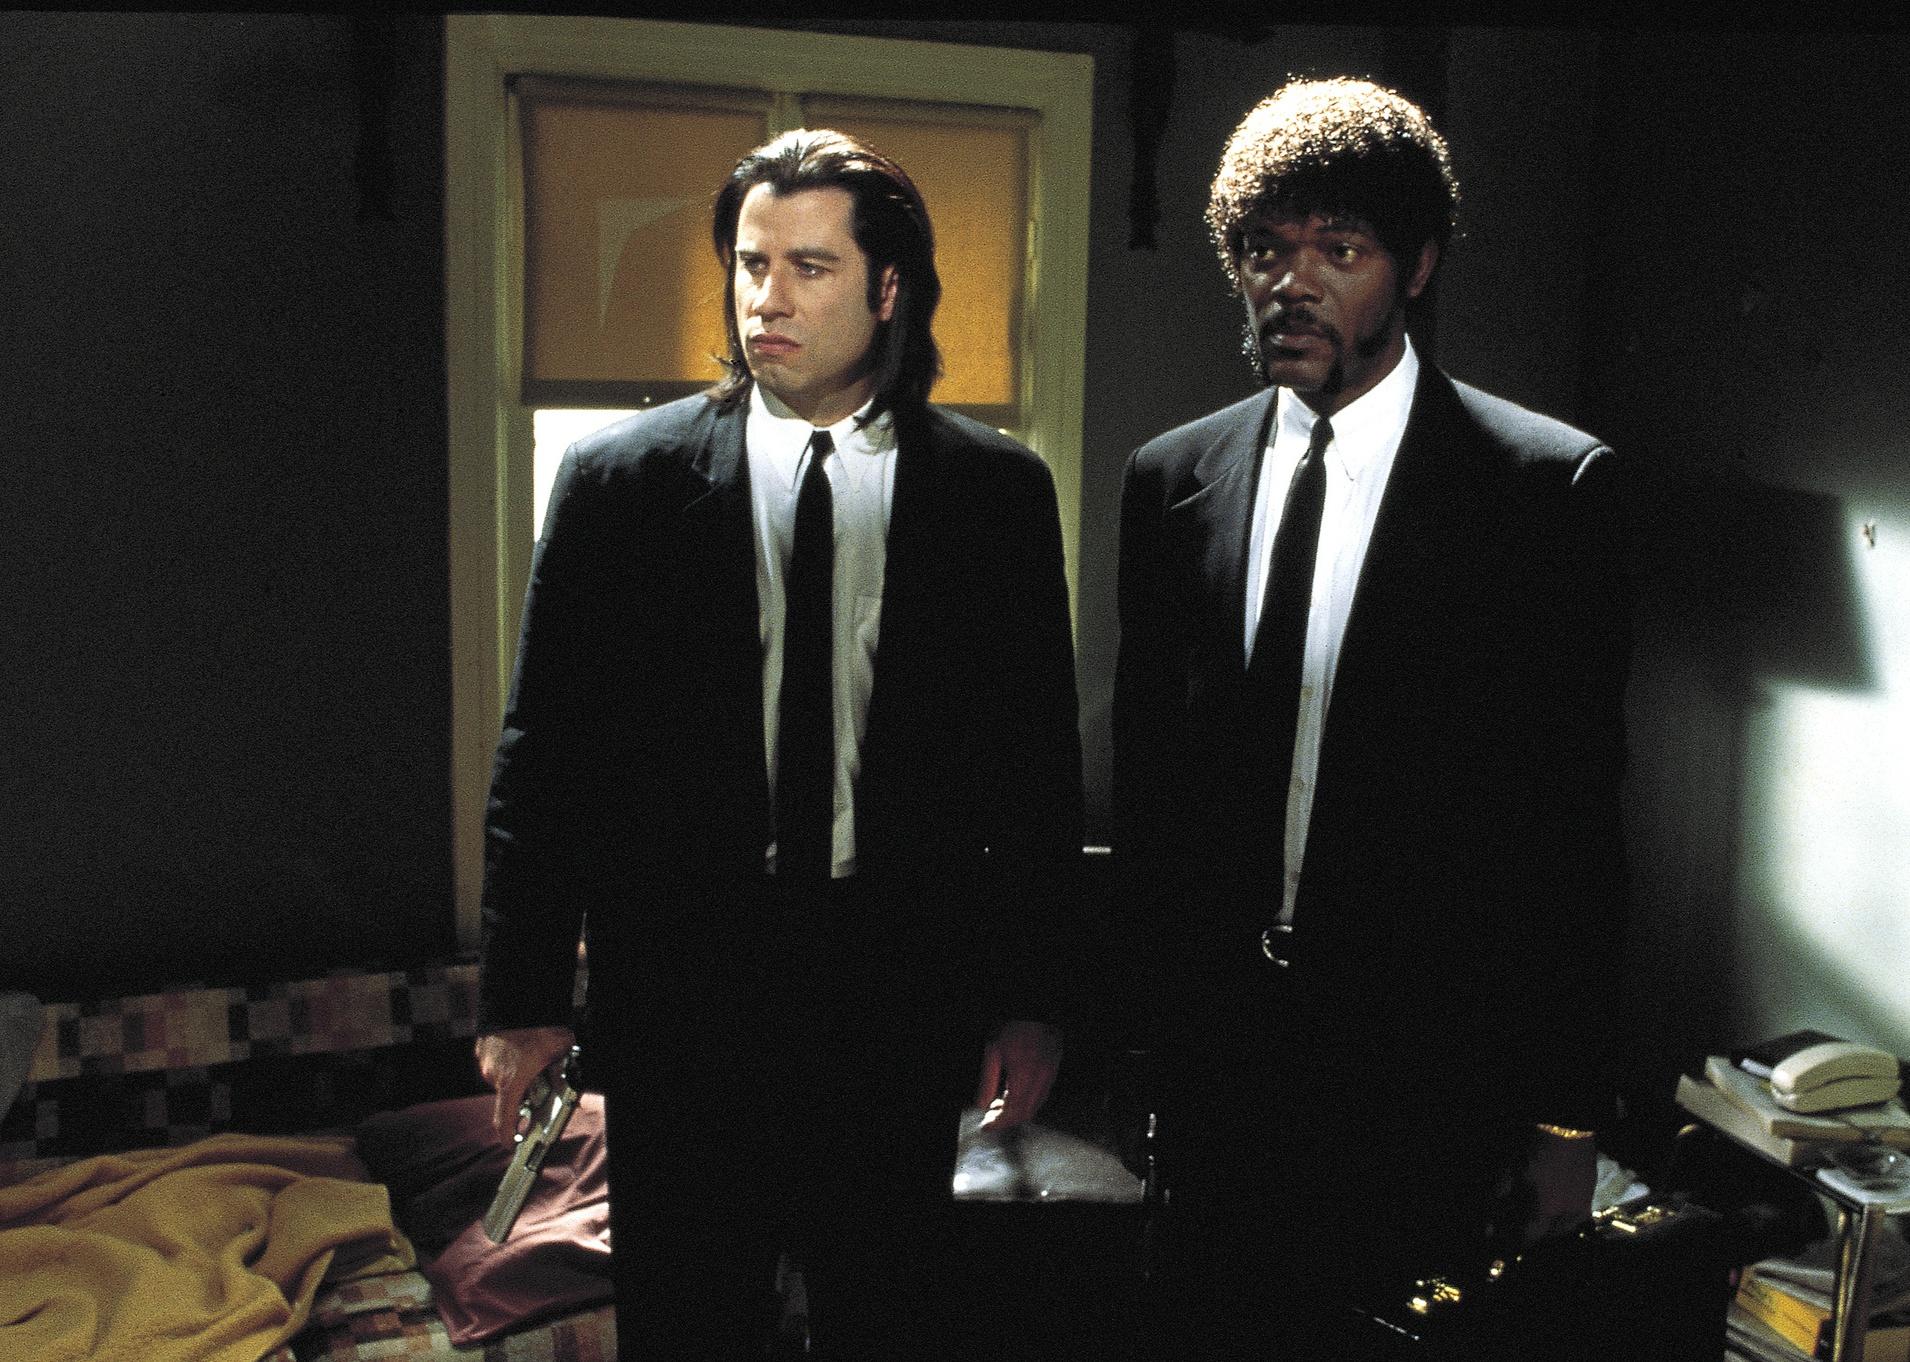 Actors John Travolta and Samuel L. Jackson in a scene from ‘Pulp Fiction.'